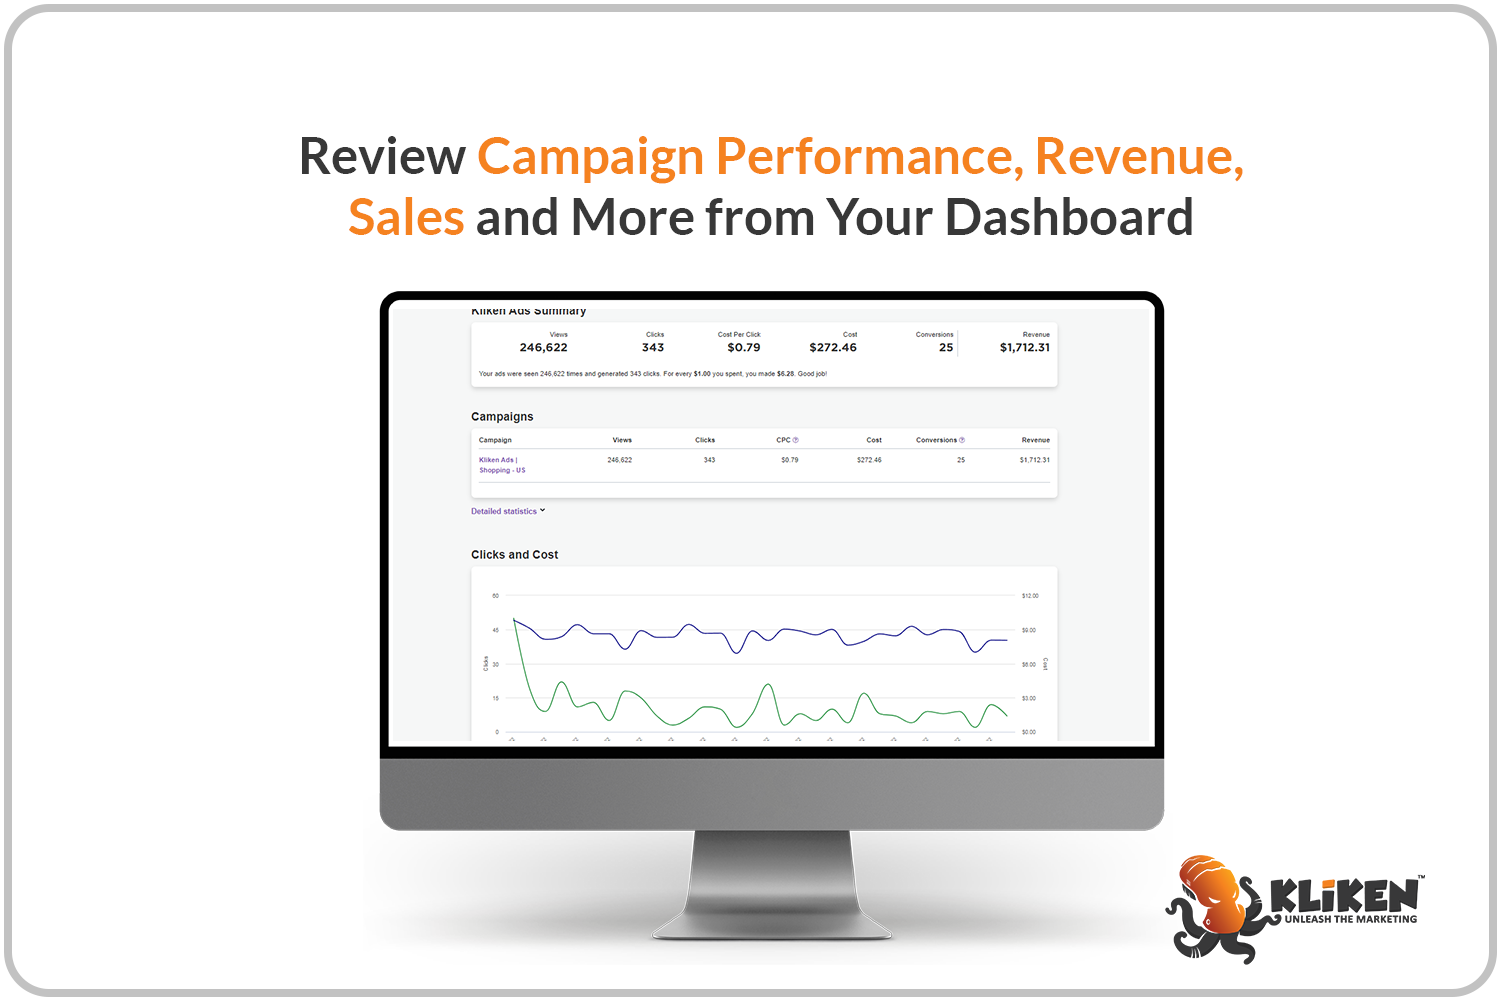 Review campaign performance, revenue, sales and more from your dashboard